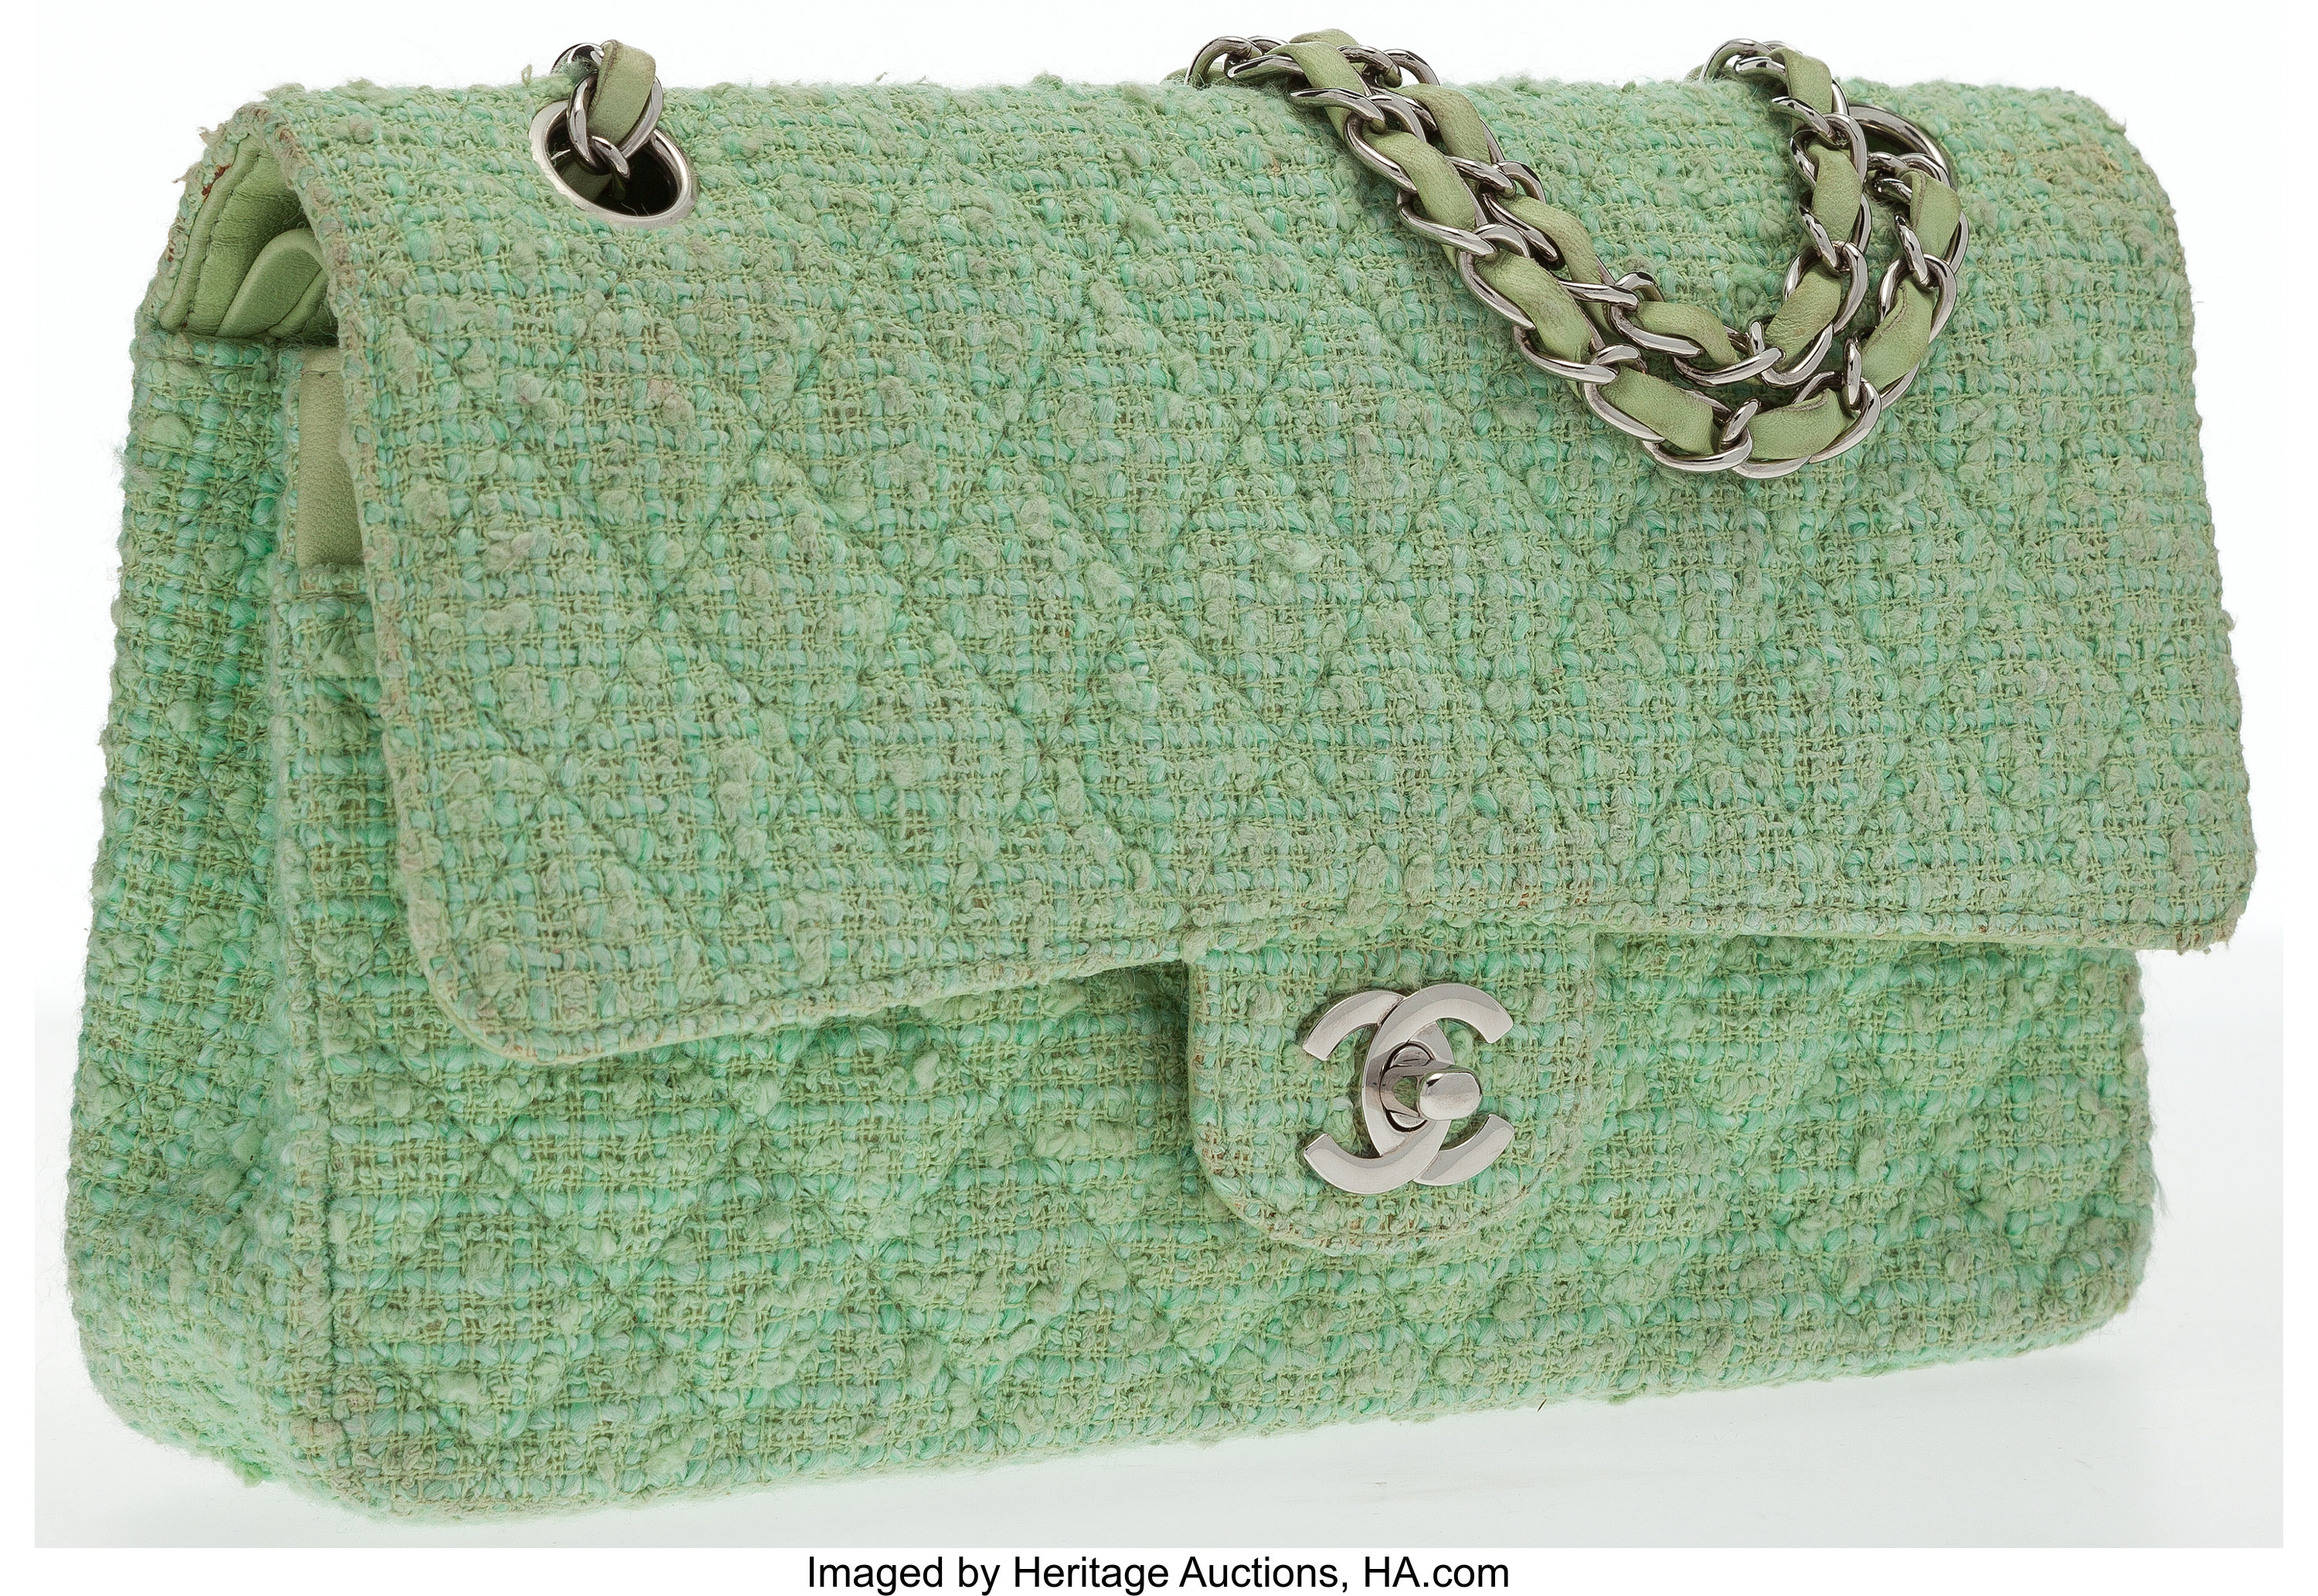 Heritage Vintage: Chanel Pale Green Lambskin Bag with Silver, Lot #75006